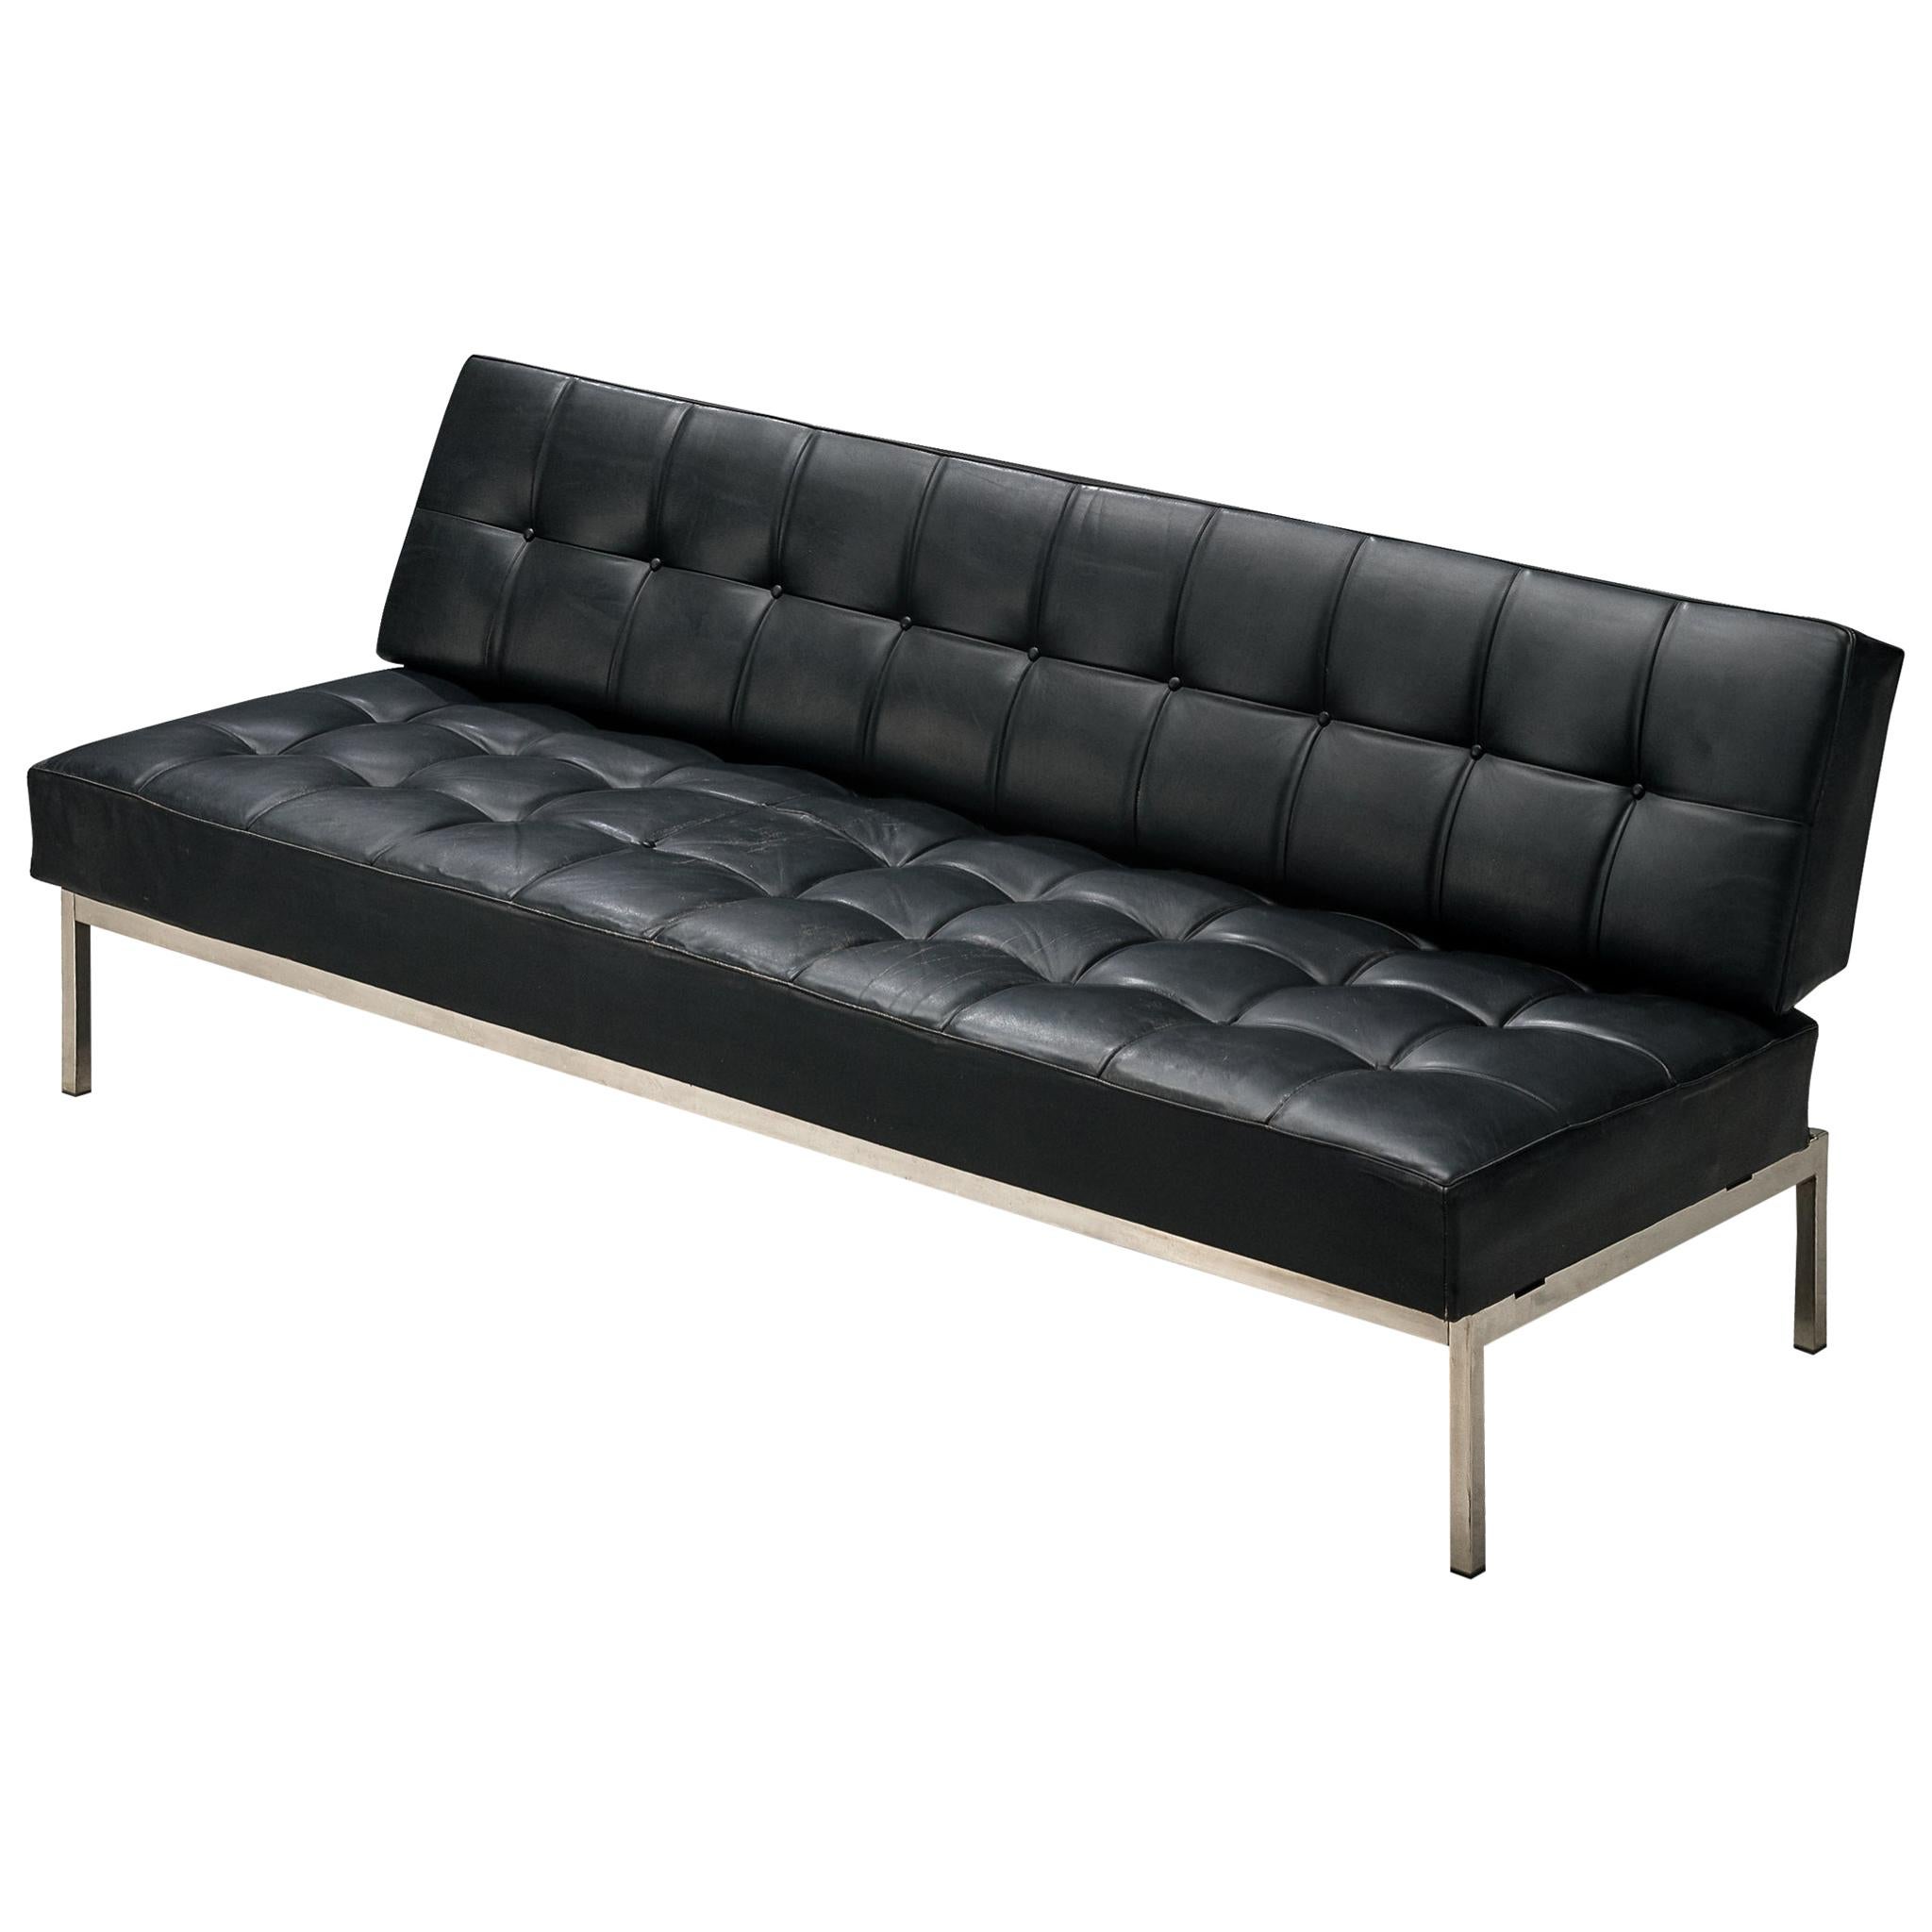 Johannes Spalt 'Constanze' Sofa Daybed in Black Leather and Steel  For Sale